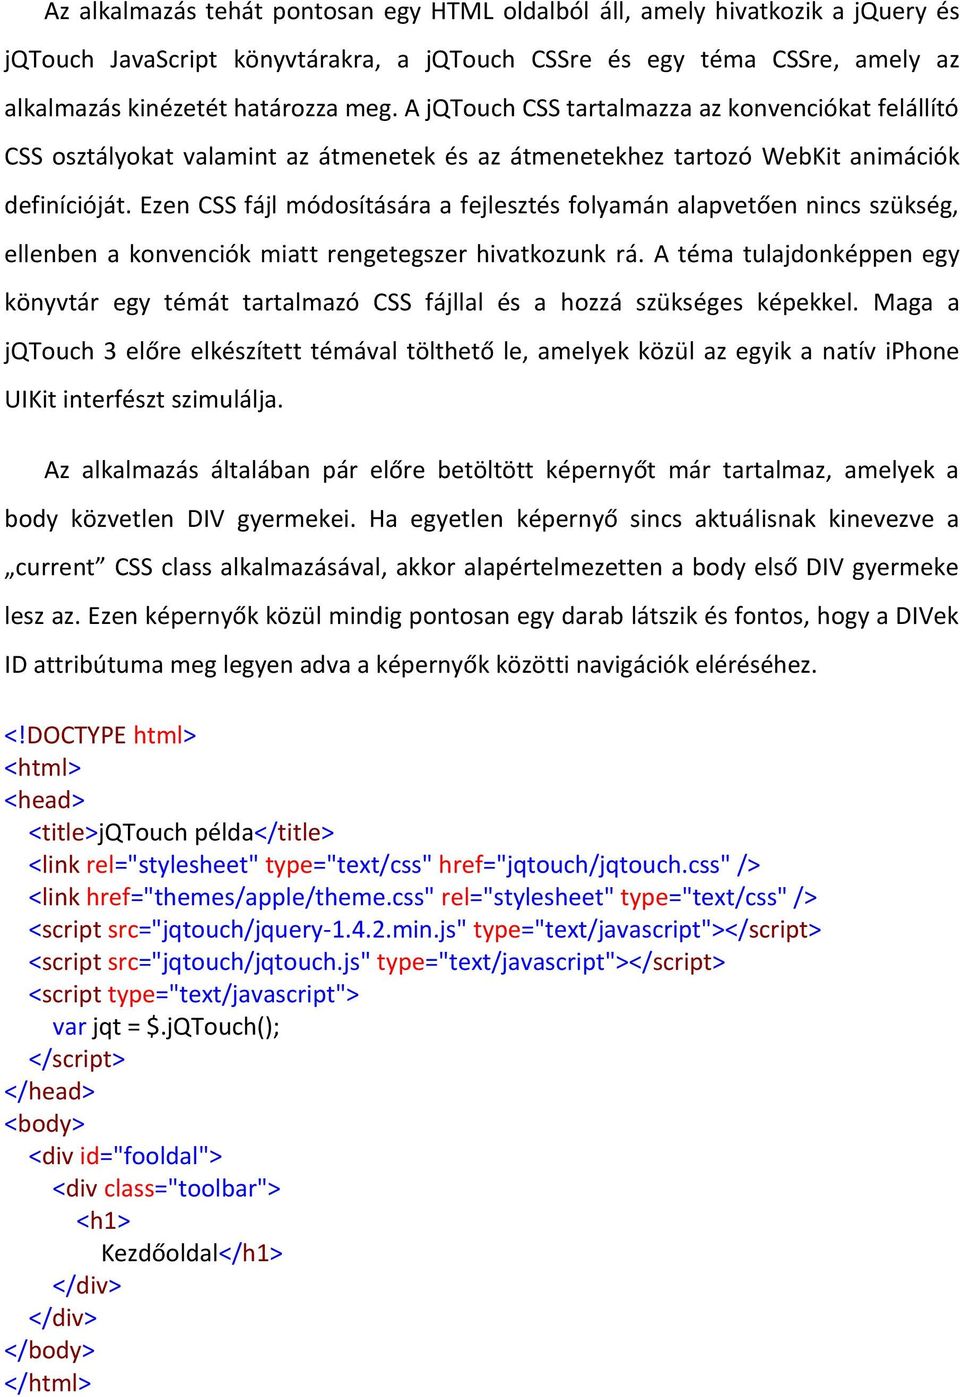 css" /> <link href="themes/apple/theme.css" rel="stylesheet" type="text/css" /> <script src="jqtouch/jquery-1.4.2.min.